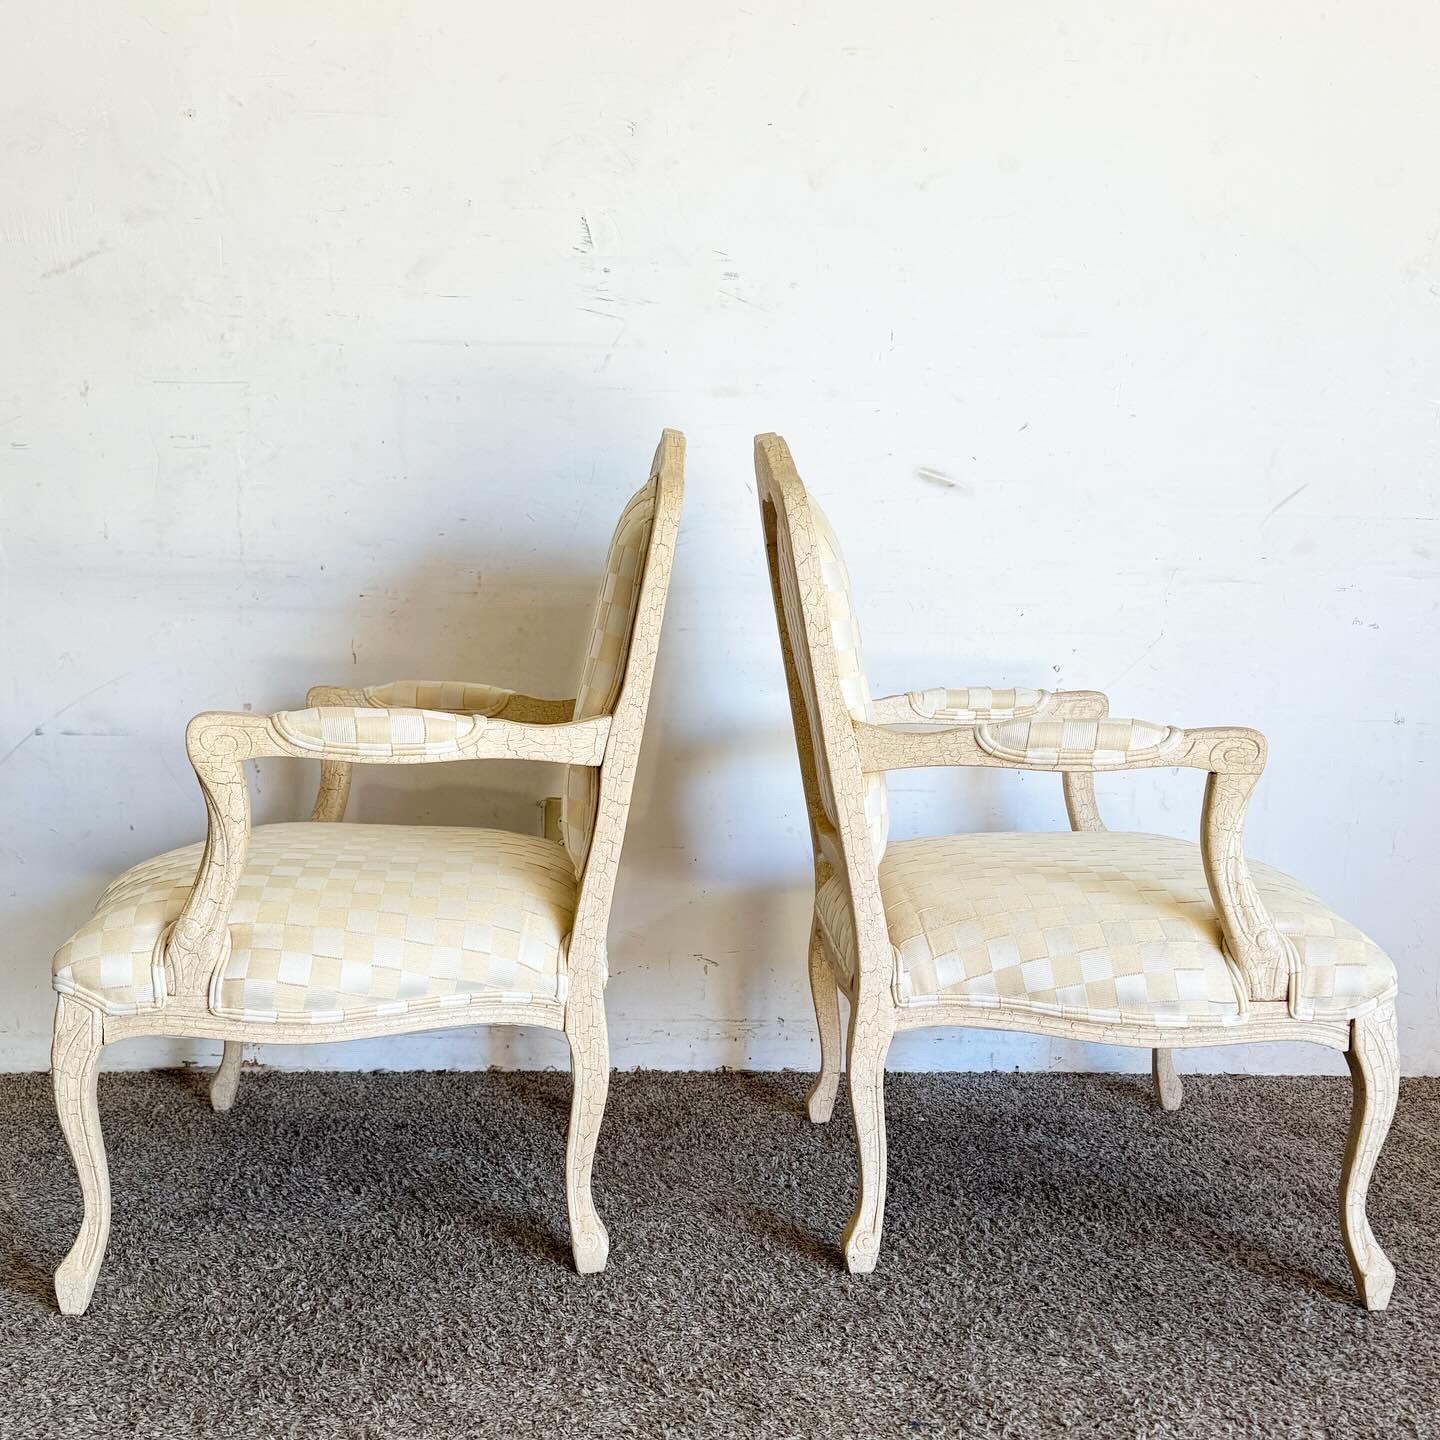 Vintage Regency Cream Crackled Finish Arm Chairs - a Pair For Sale 2